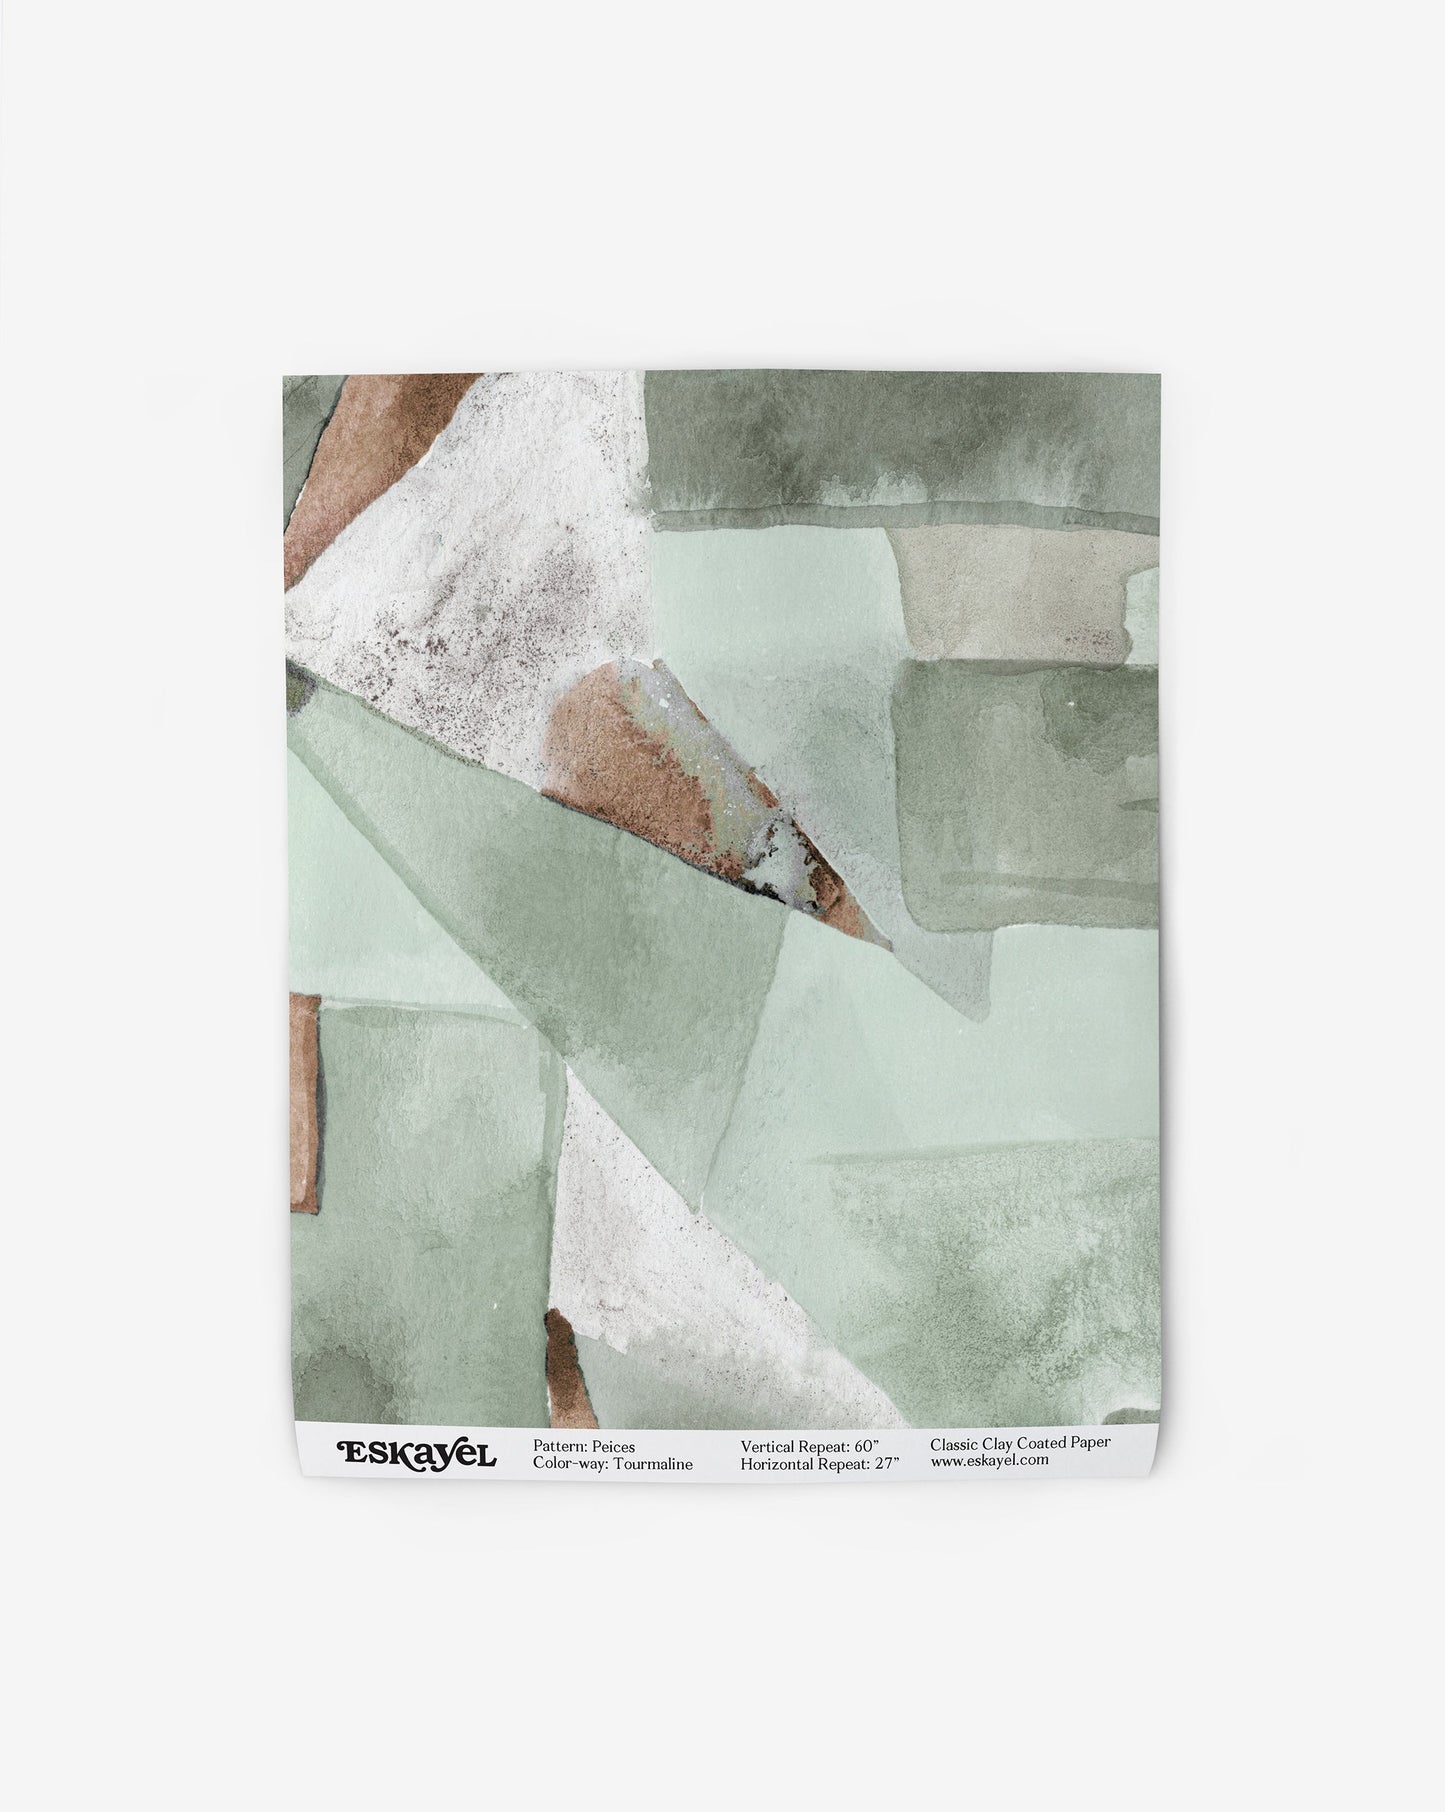 Our Pieces Wallpaper in Tourmaline has a design of color blocked puzzle pieces in shades of green and a rusty brown throughout.